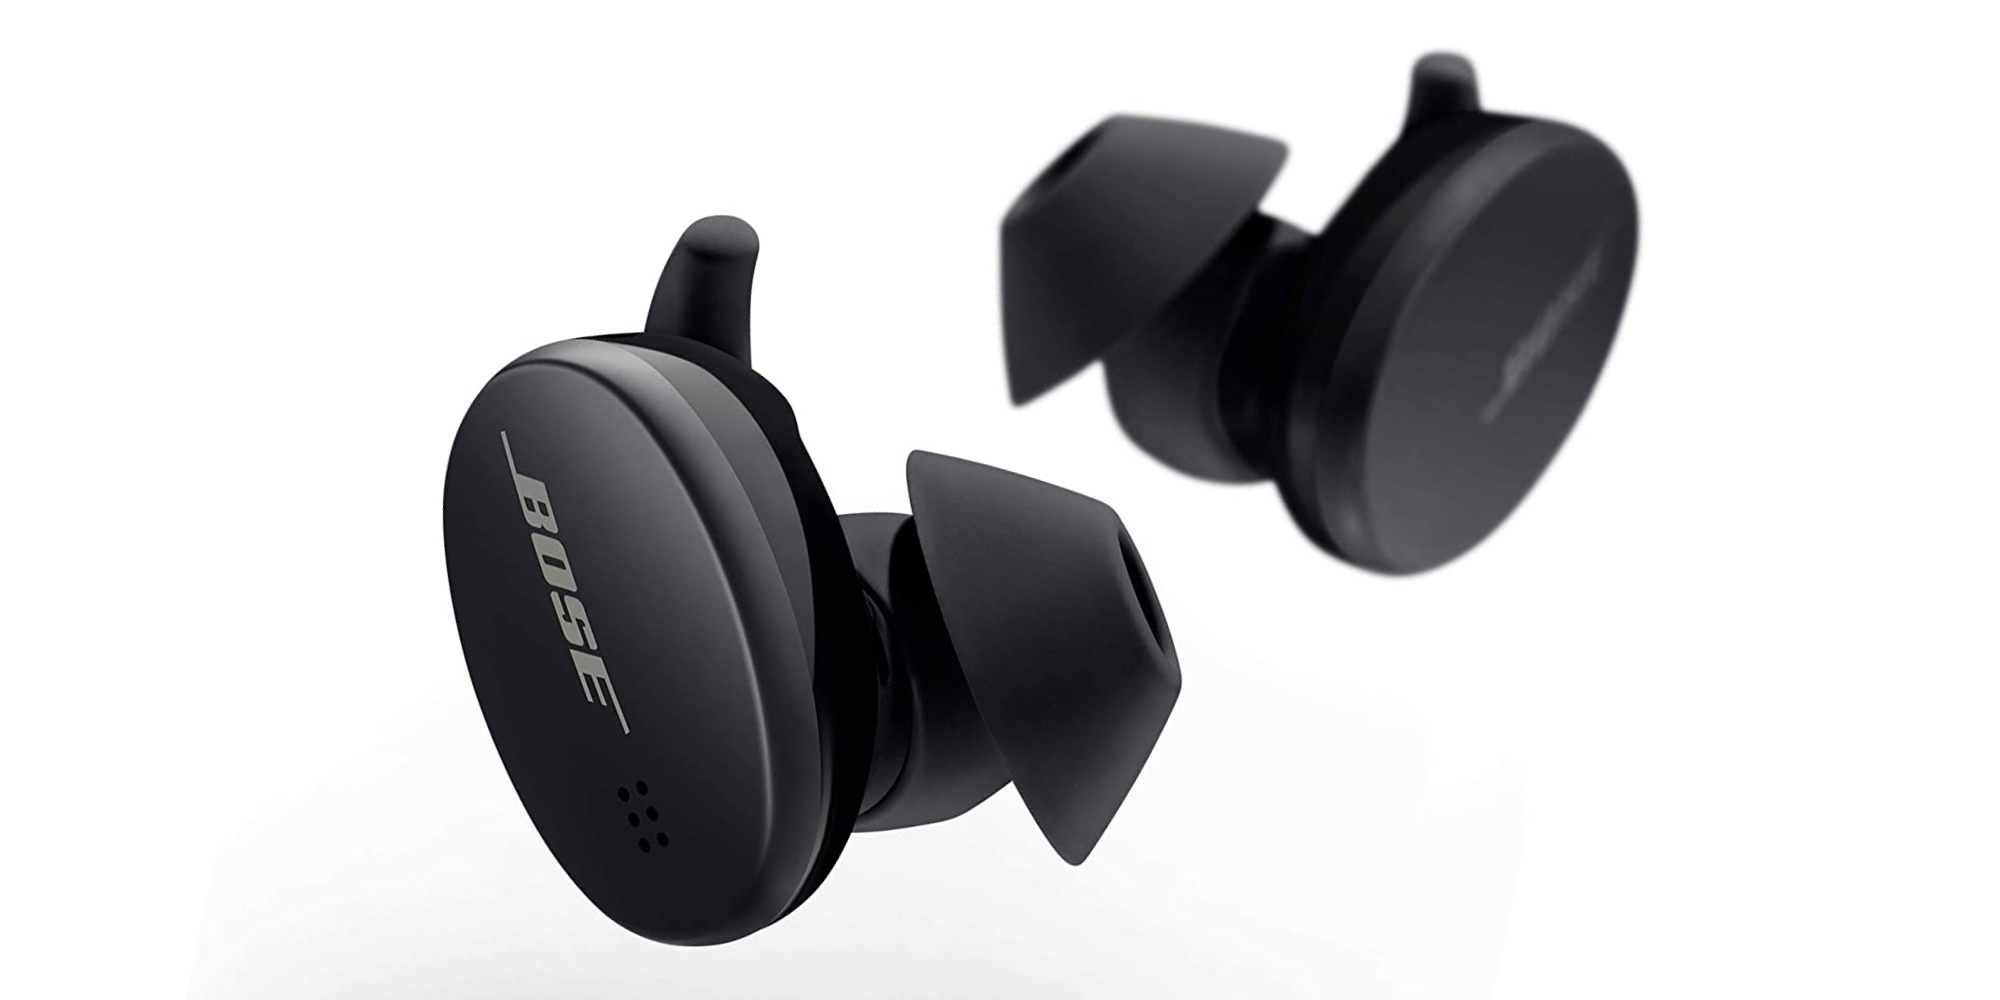 Bose Black Friday sale now live Earbuds, headphones, more 9to5Toys